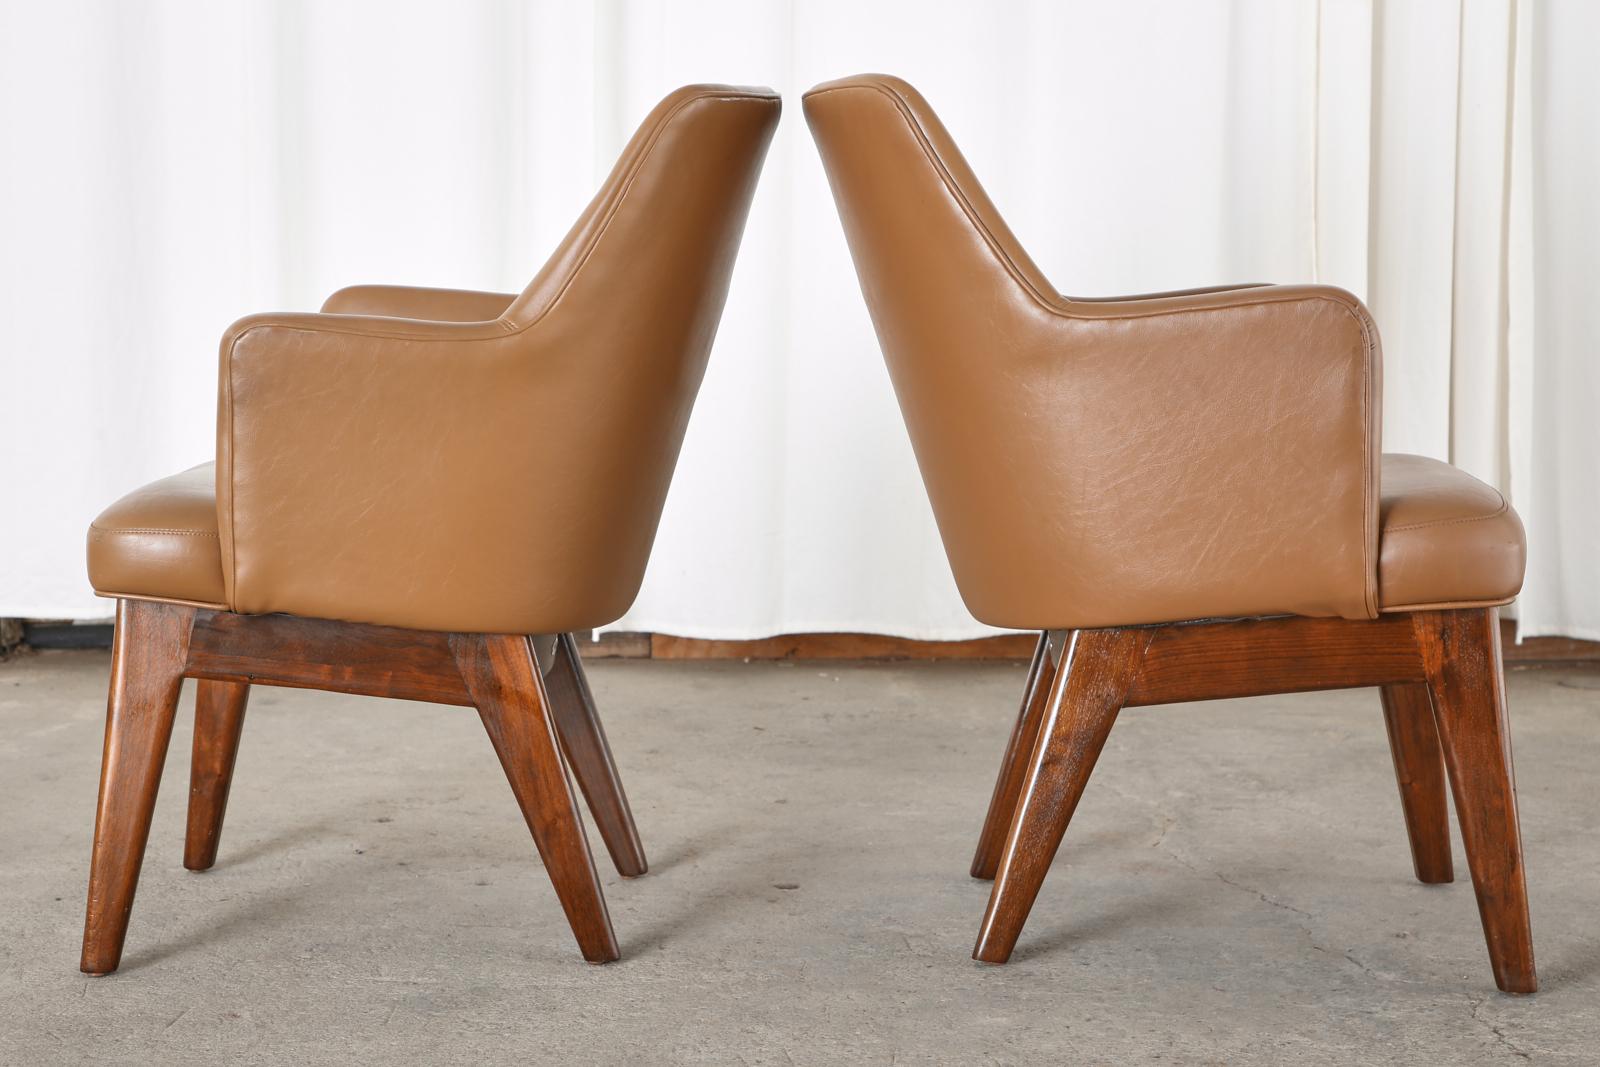 Hand-Crafted Pair of Mid-Century Modern Style Walnut Lounge Chairs